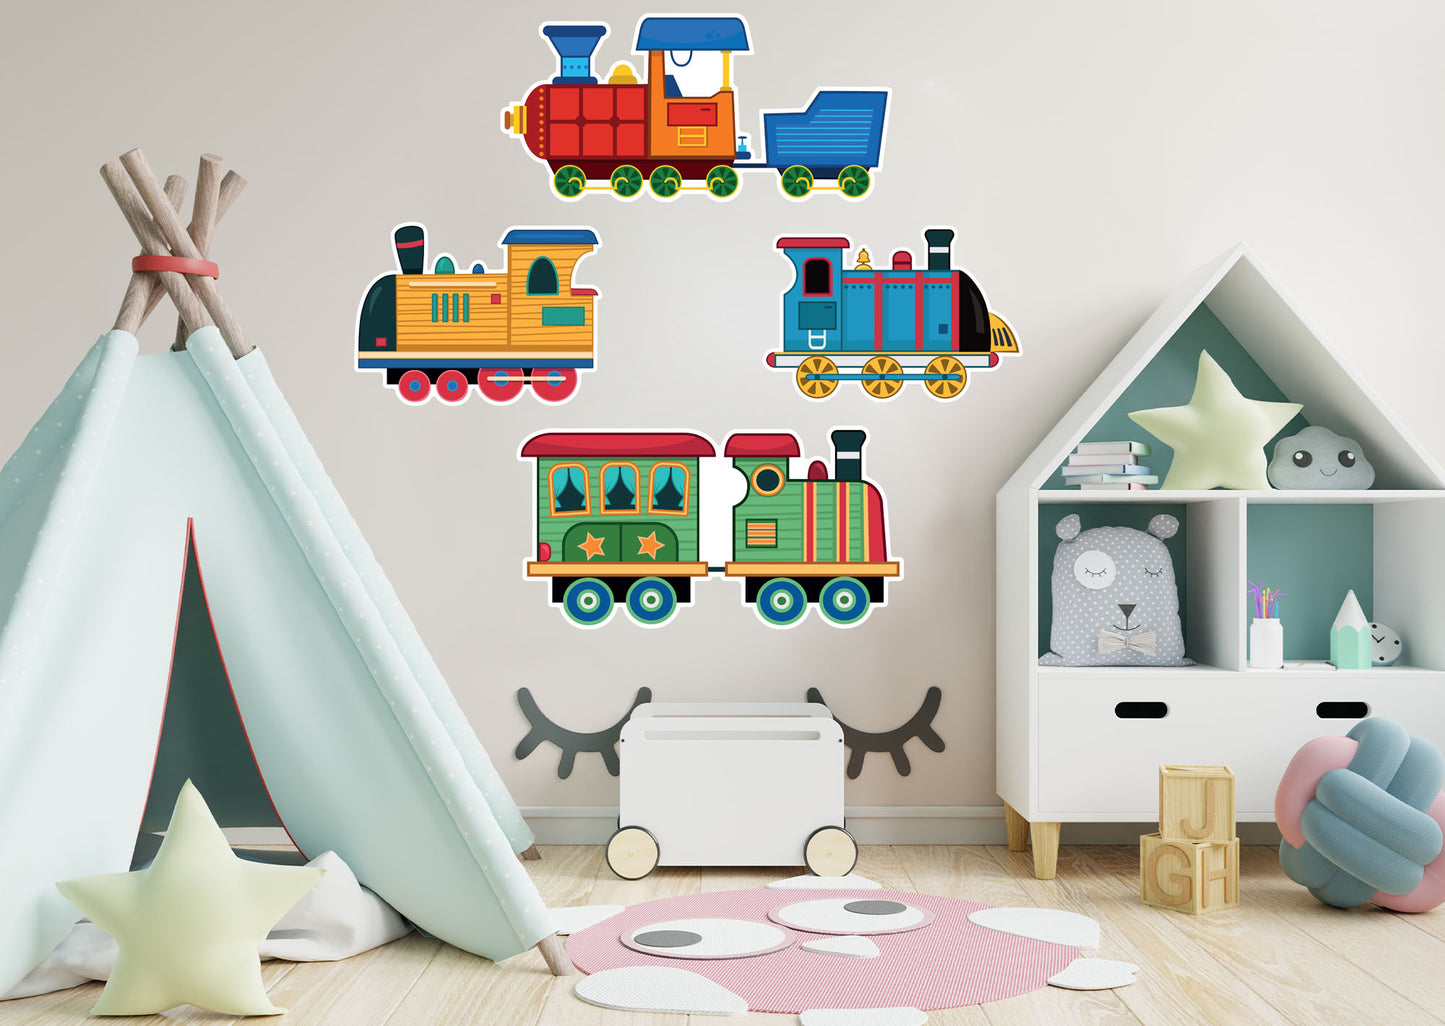 Nursery:  Four Trains Collection        -   Removable Wall   Adhesive Decal